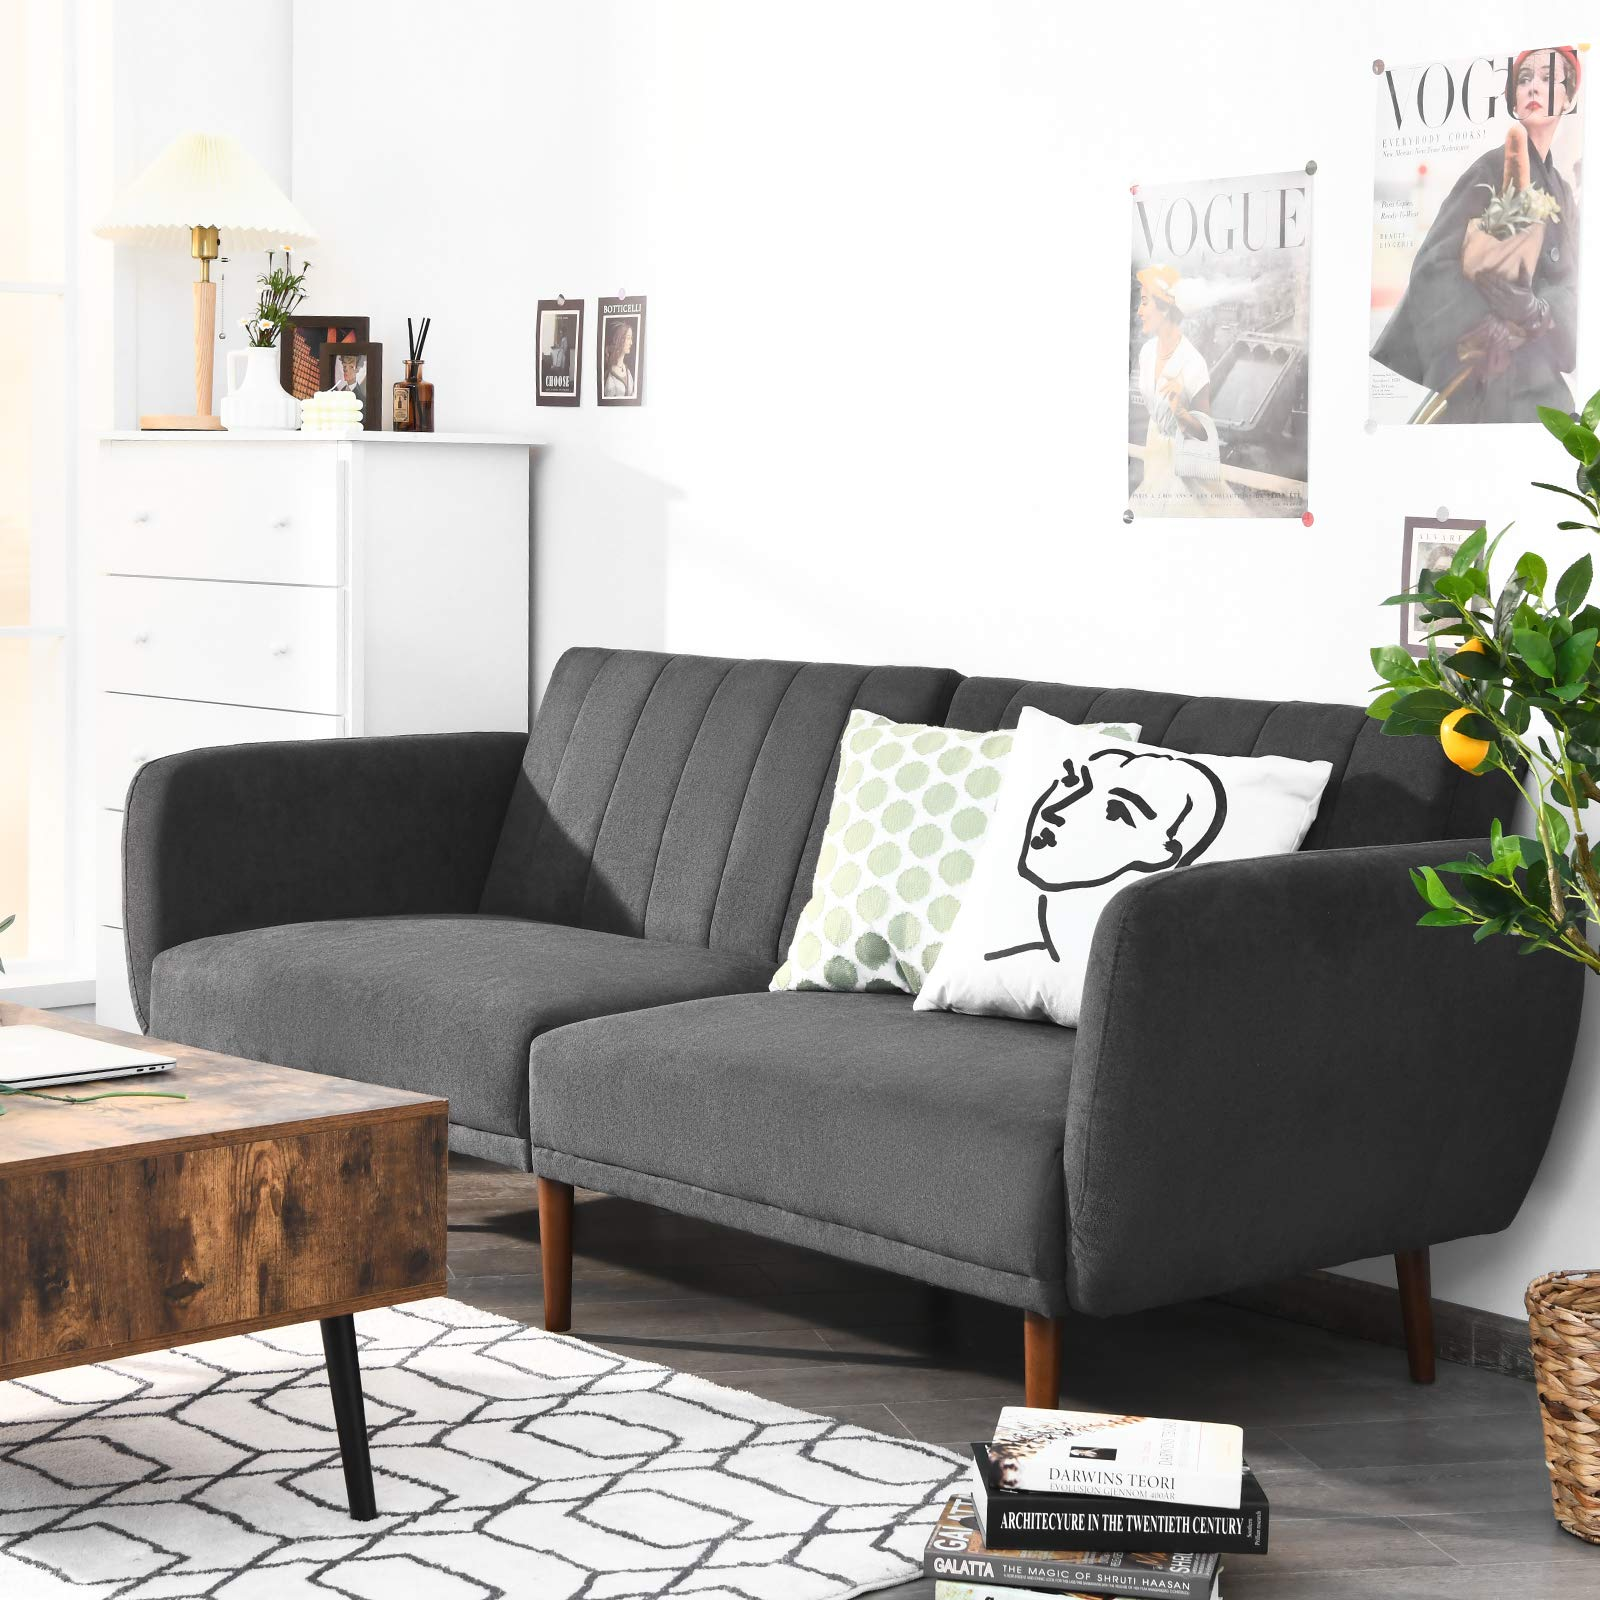 The 4 Best Living Room Furniture Pieces To Buy for Your Living Room